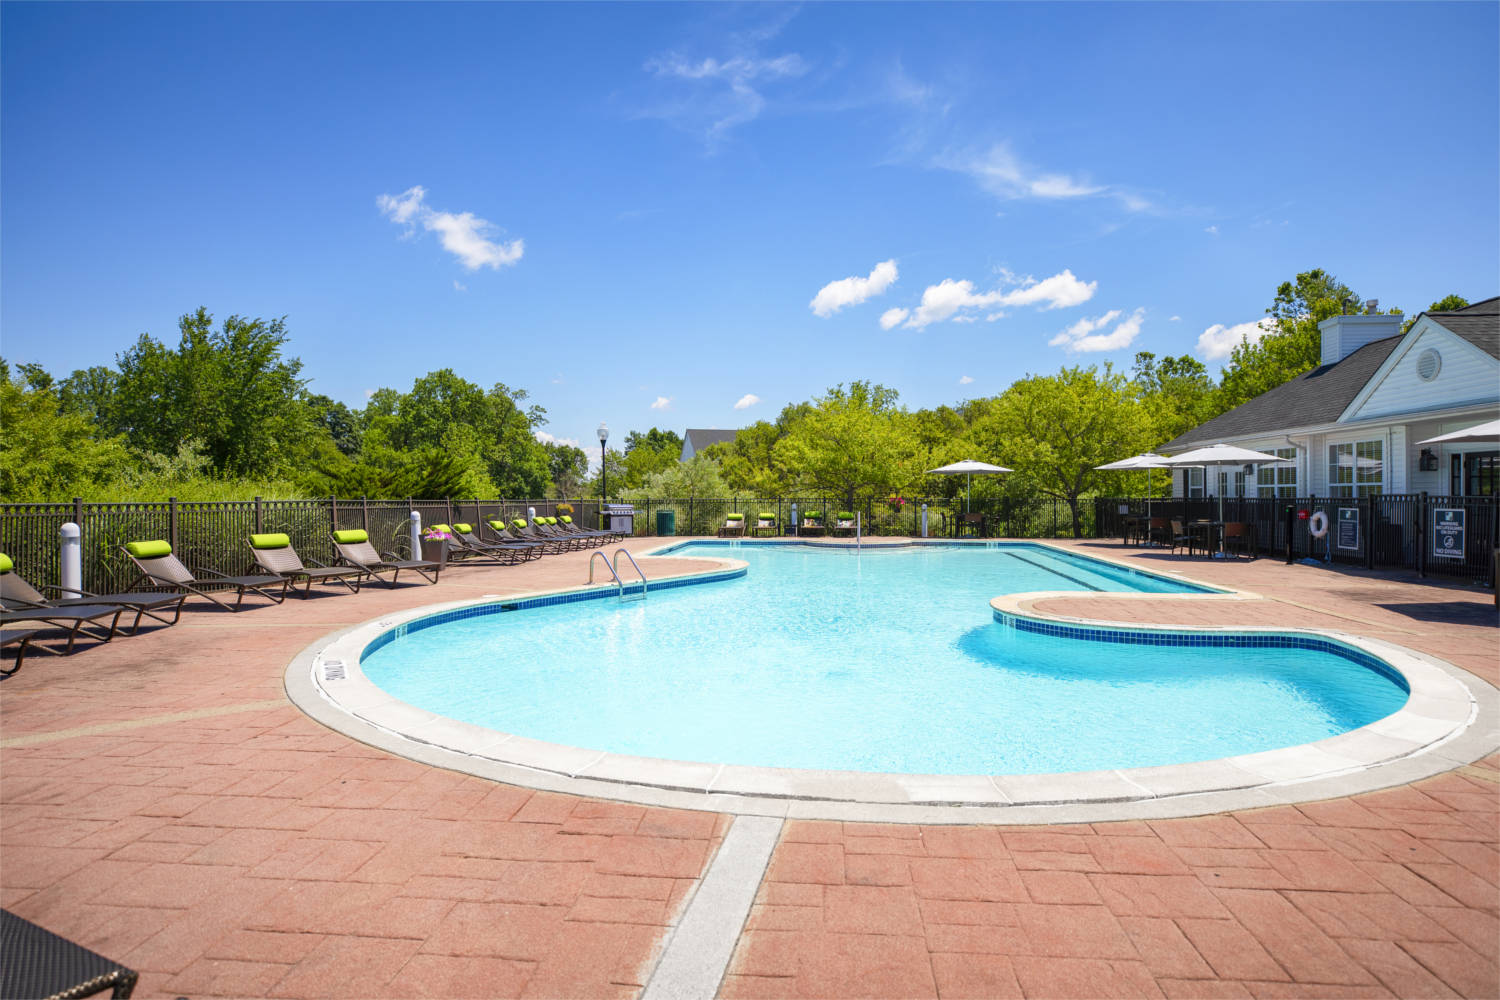 Willow Grove Apartment Homes : Pool